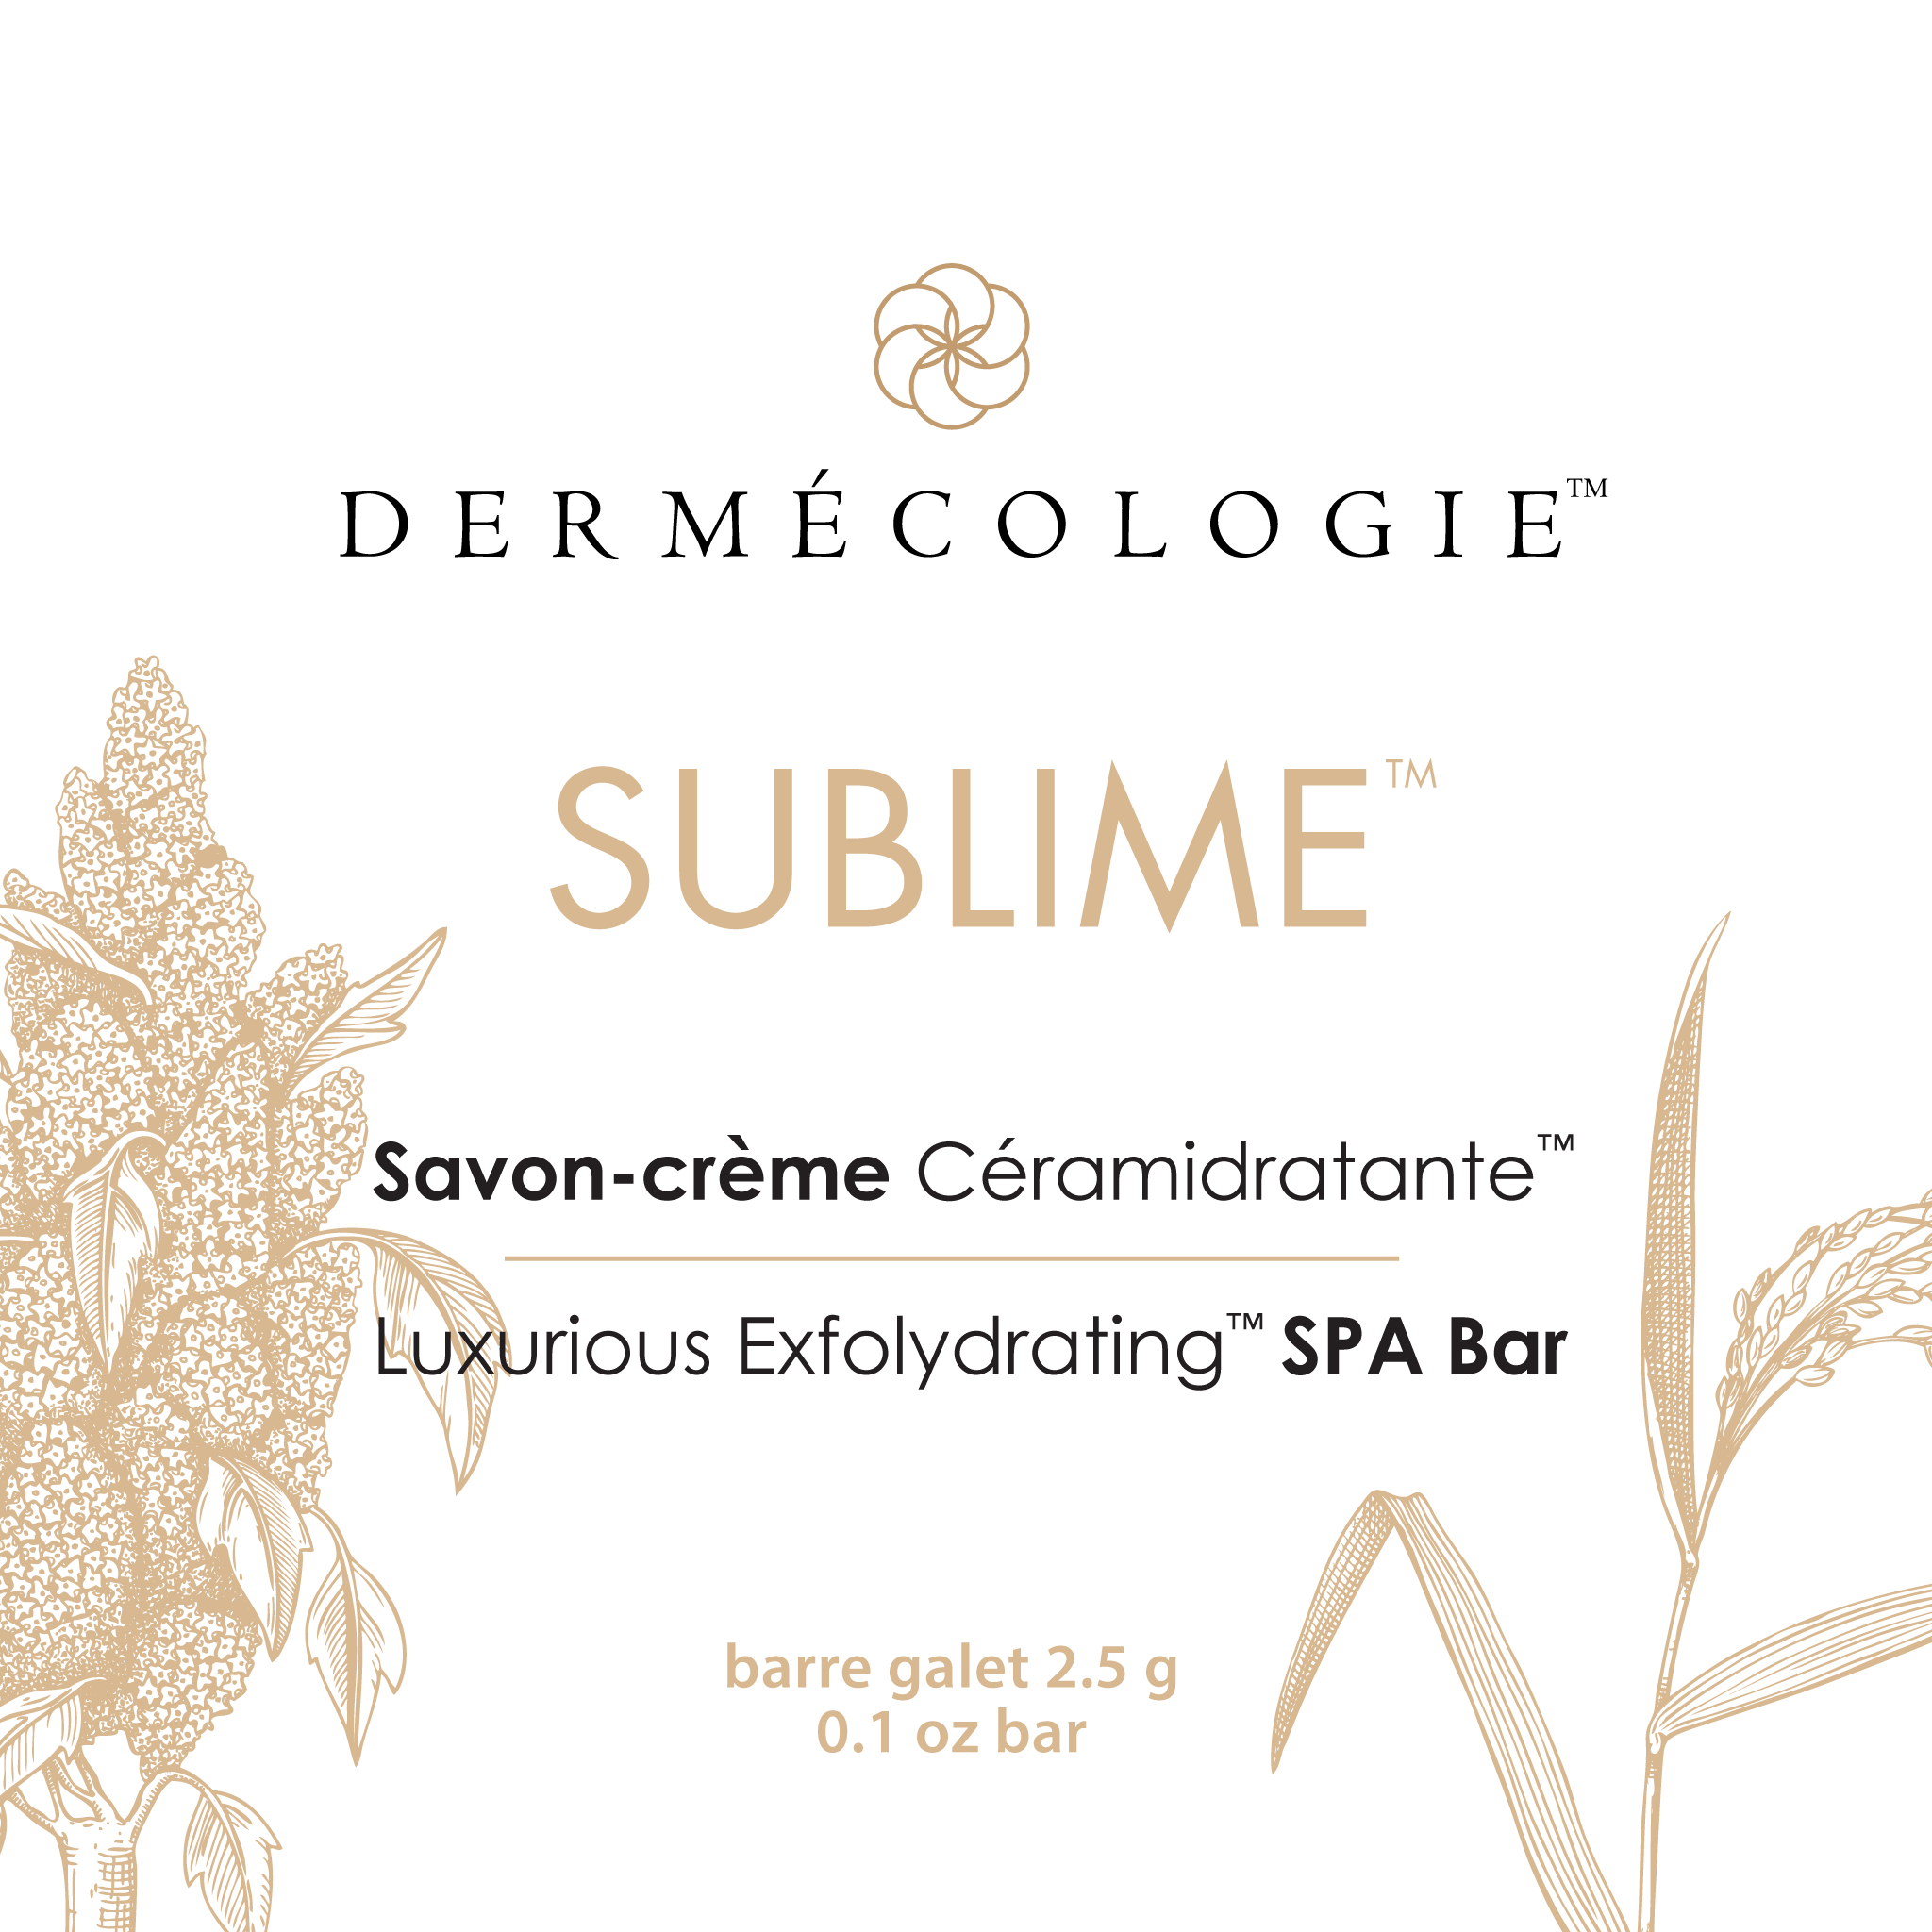 SUBLIME Exfoliating Body Care™ 2.5g in Eco-Pouch - Travel Size